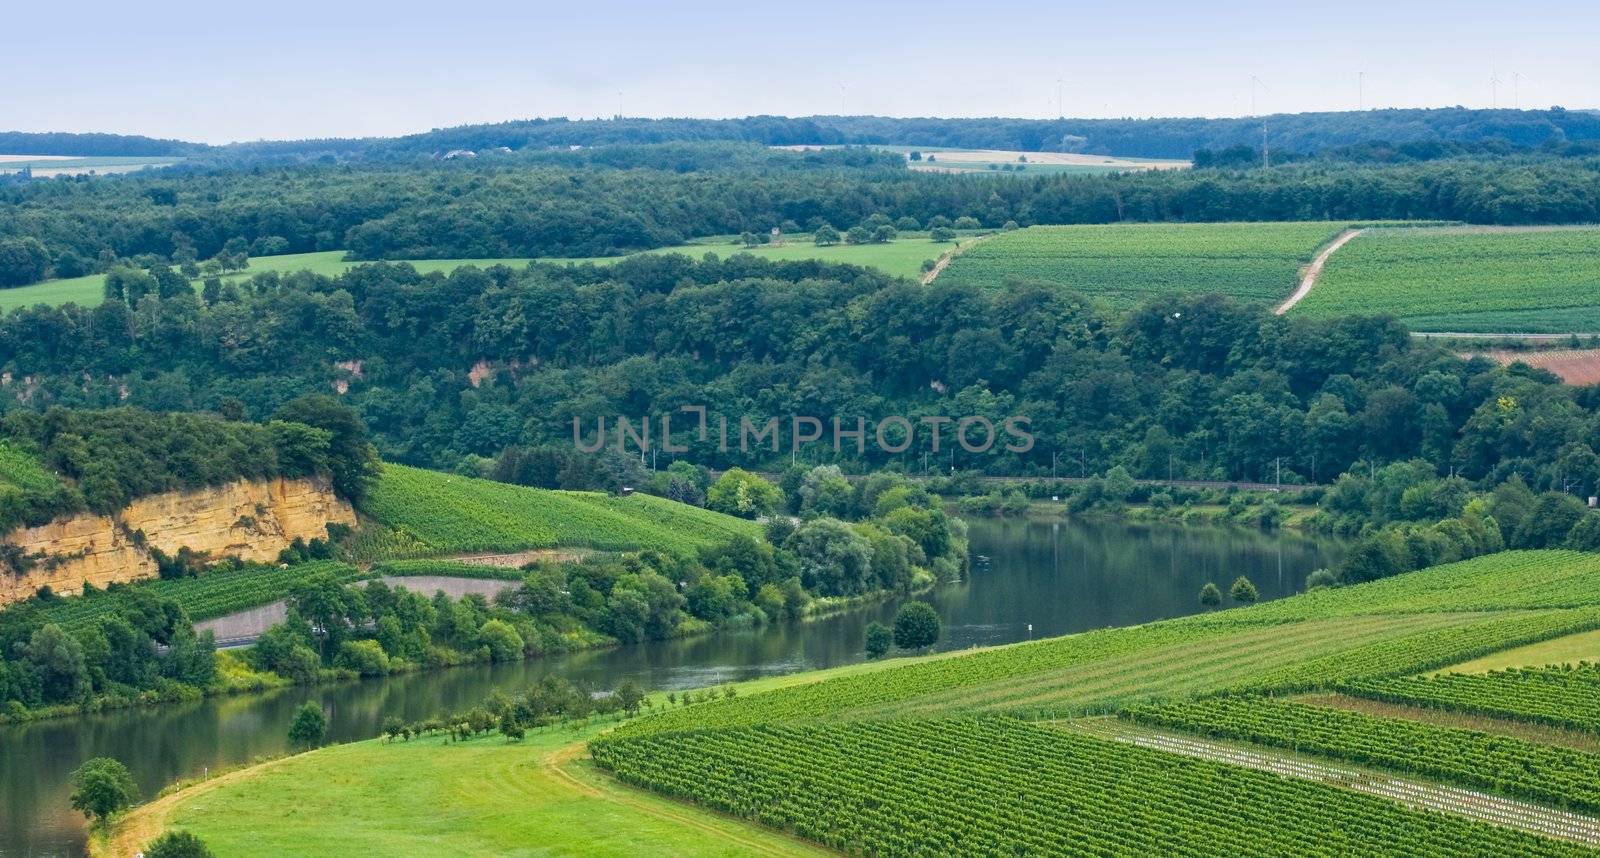 view over river Moezel or Mosel with forests and vineyards on the hills